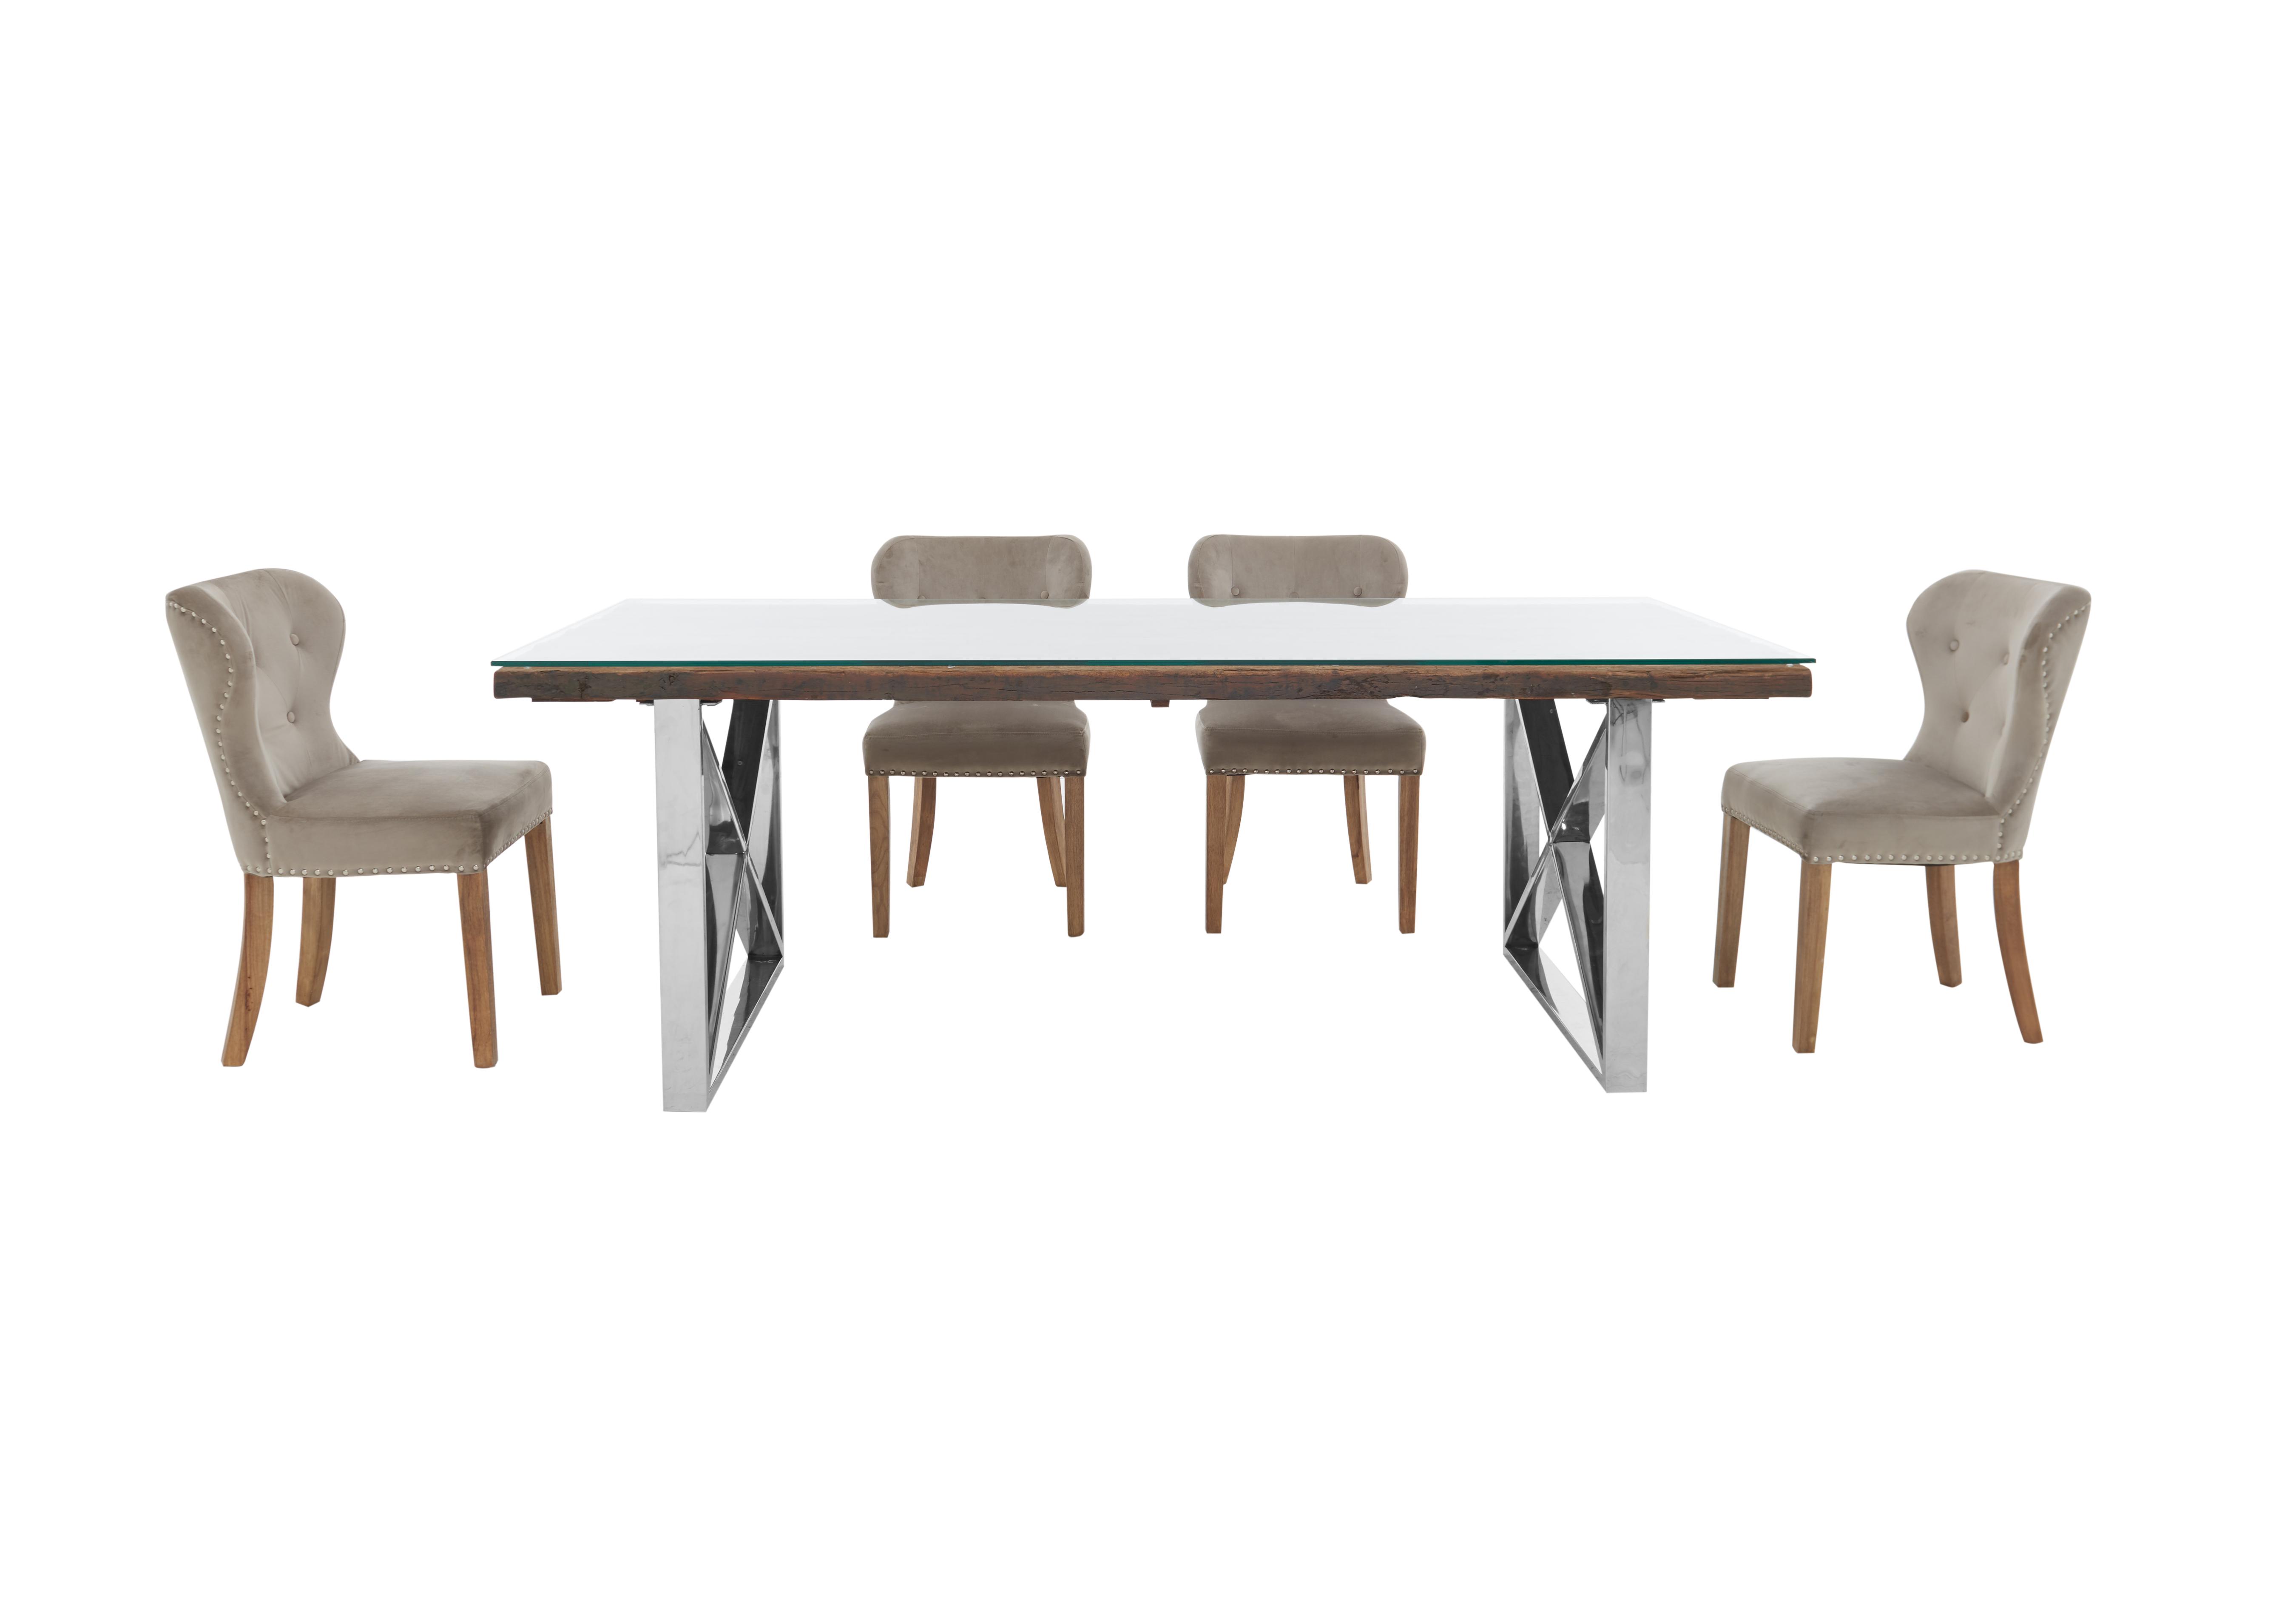 Chennai Dining Table with X-Leg Base and 4 Upholstered Dining Chairs in Taupe Chairs on Furniture Village